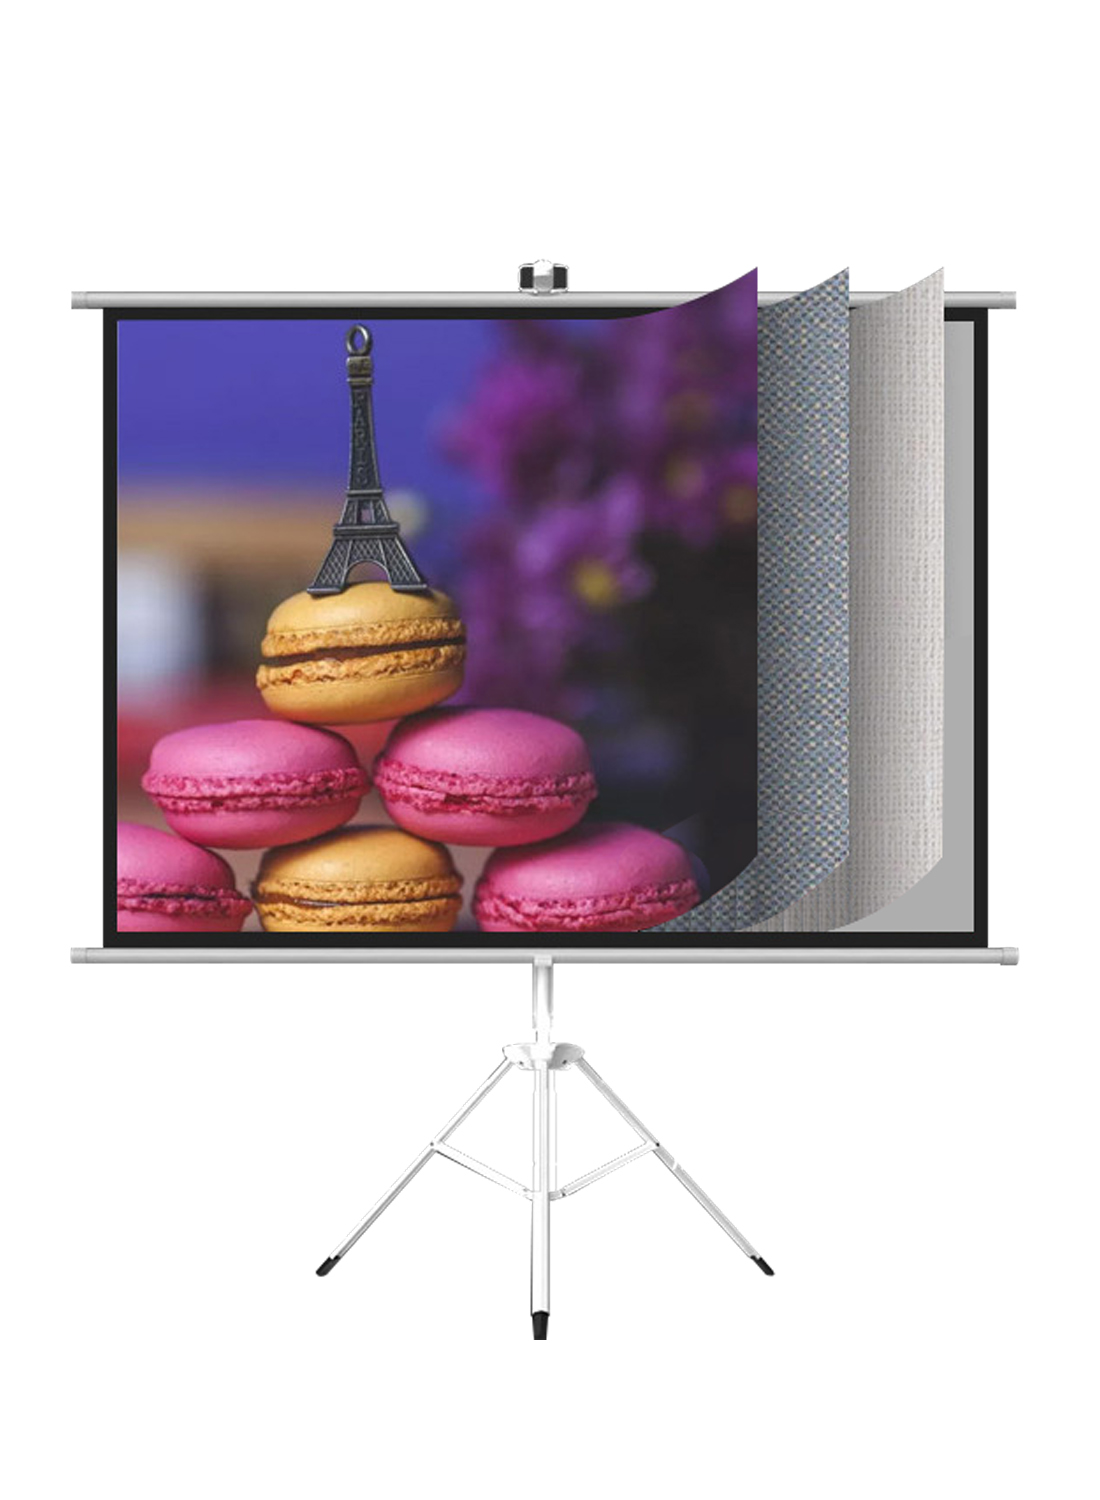 72 inch 16:9 Portable Projector Screen, White Fiberglass Material, 2-in-1 Wall Mount & Tripod Stand ET72W-169 for Outdoor and Indoor